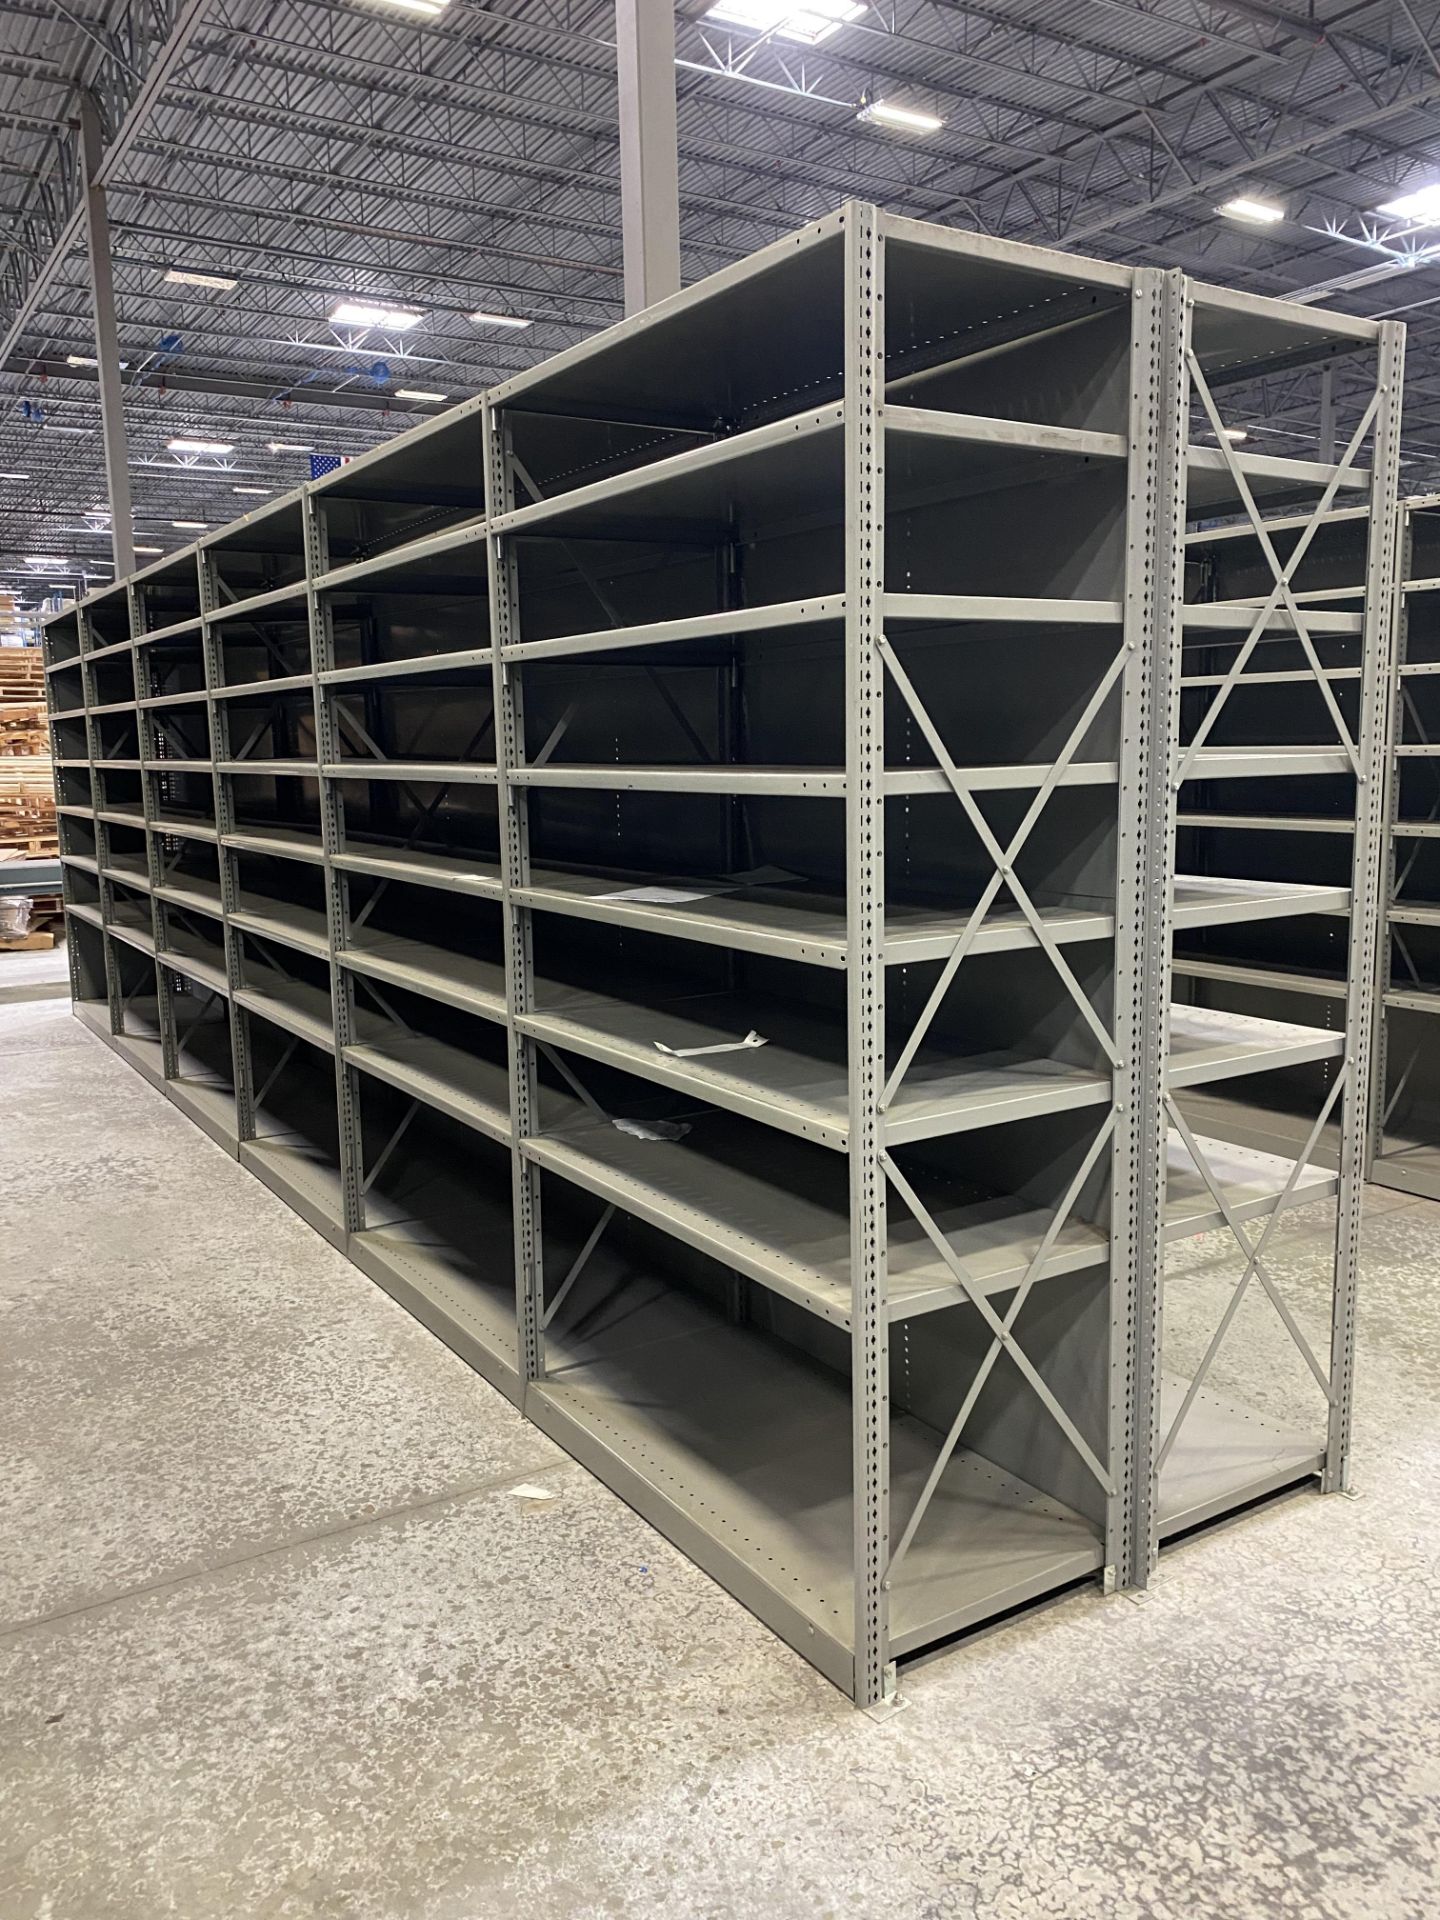 20 SECTIONS OF METAL CLOSED BACK SHELVING